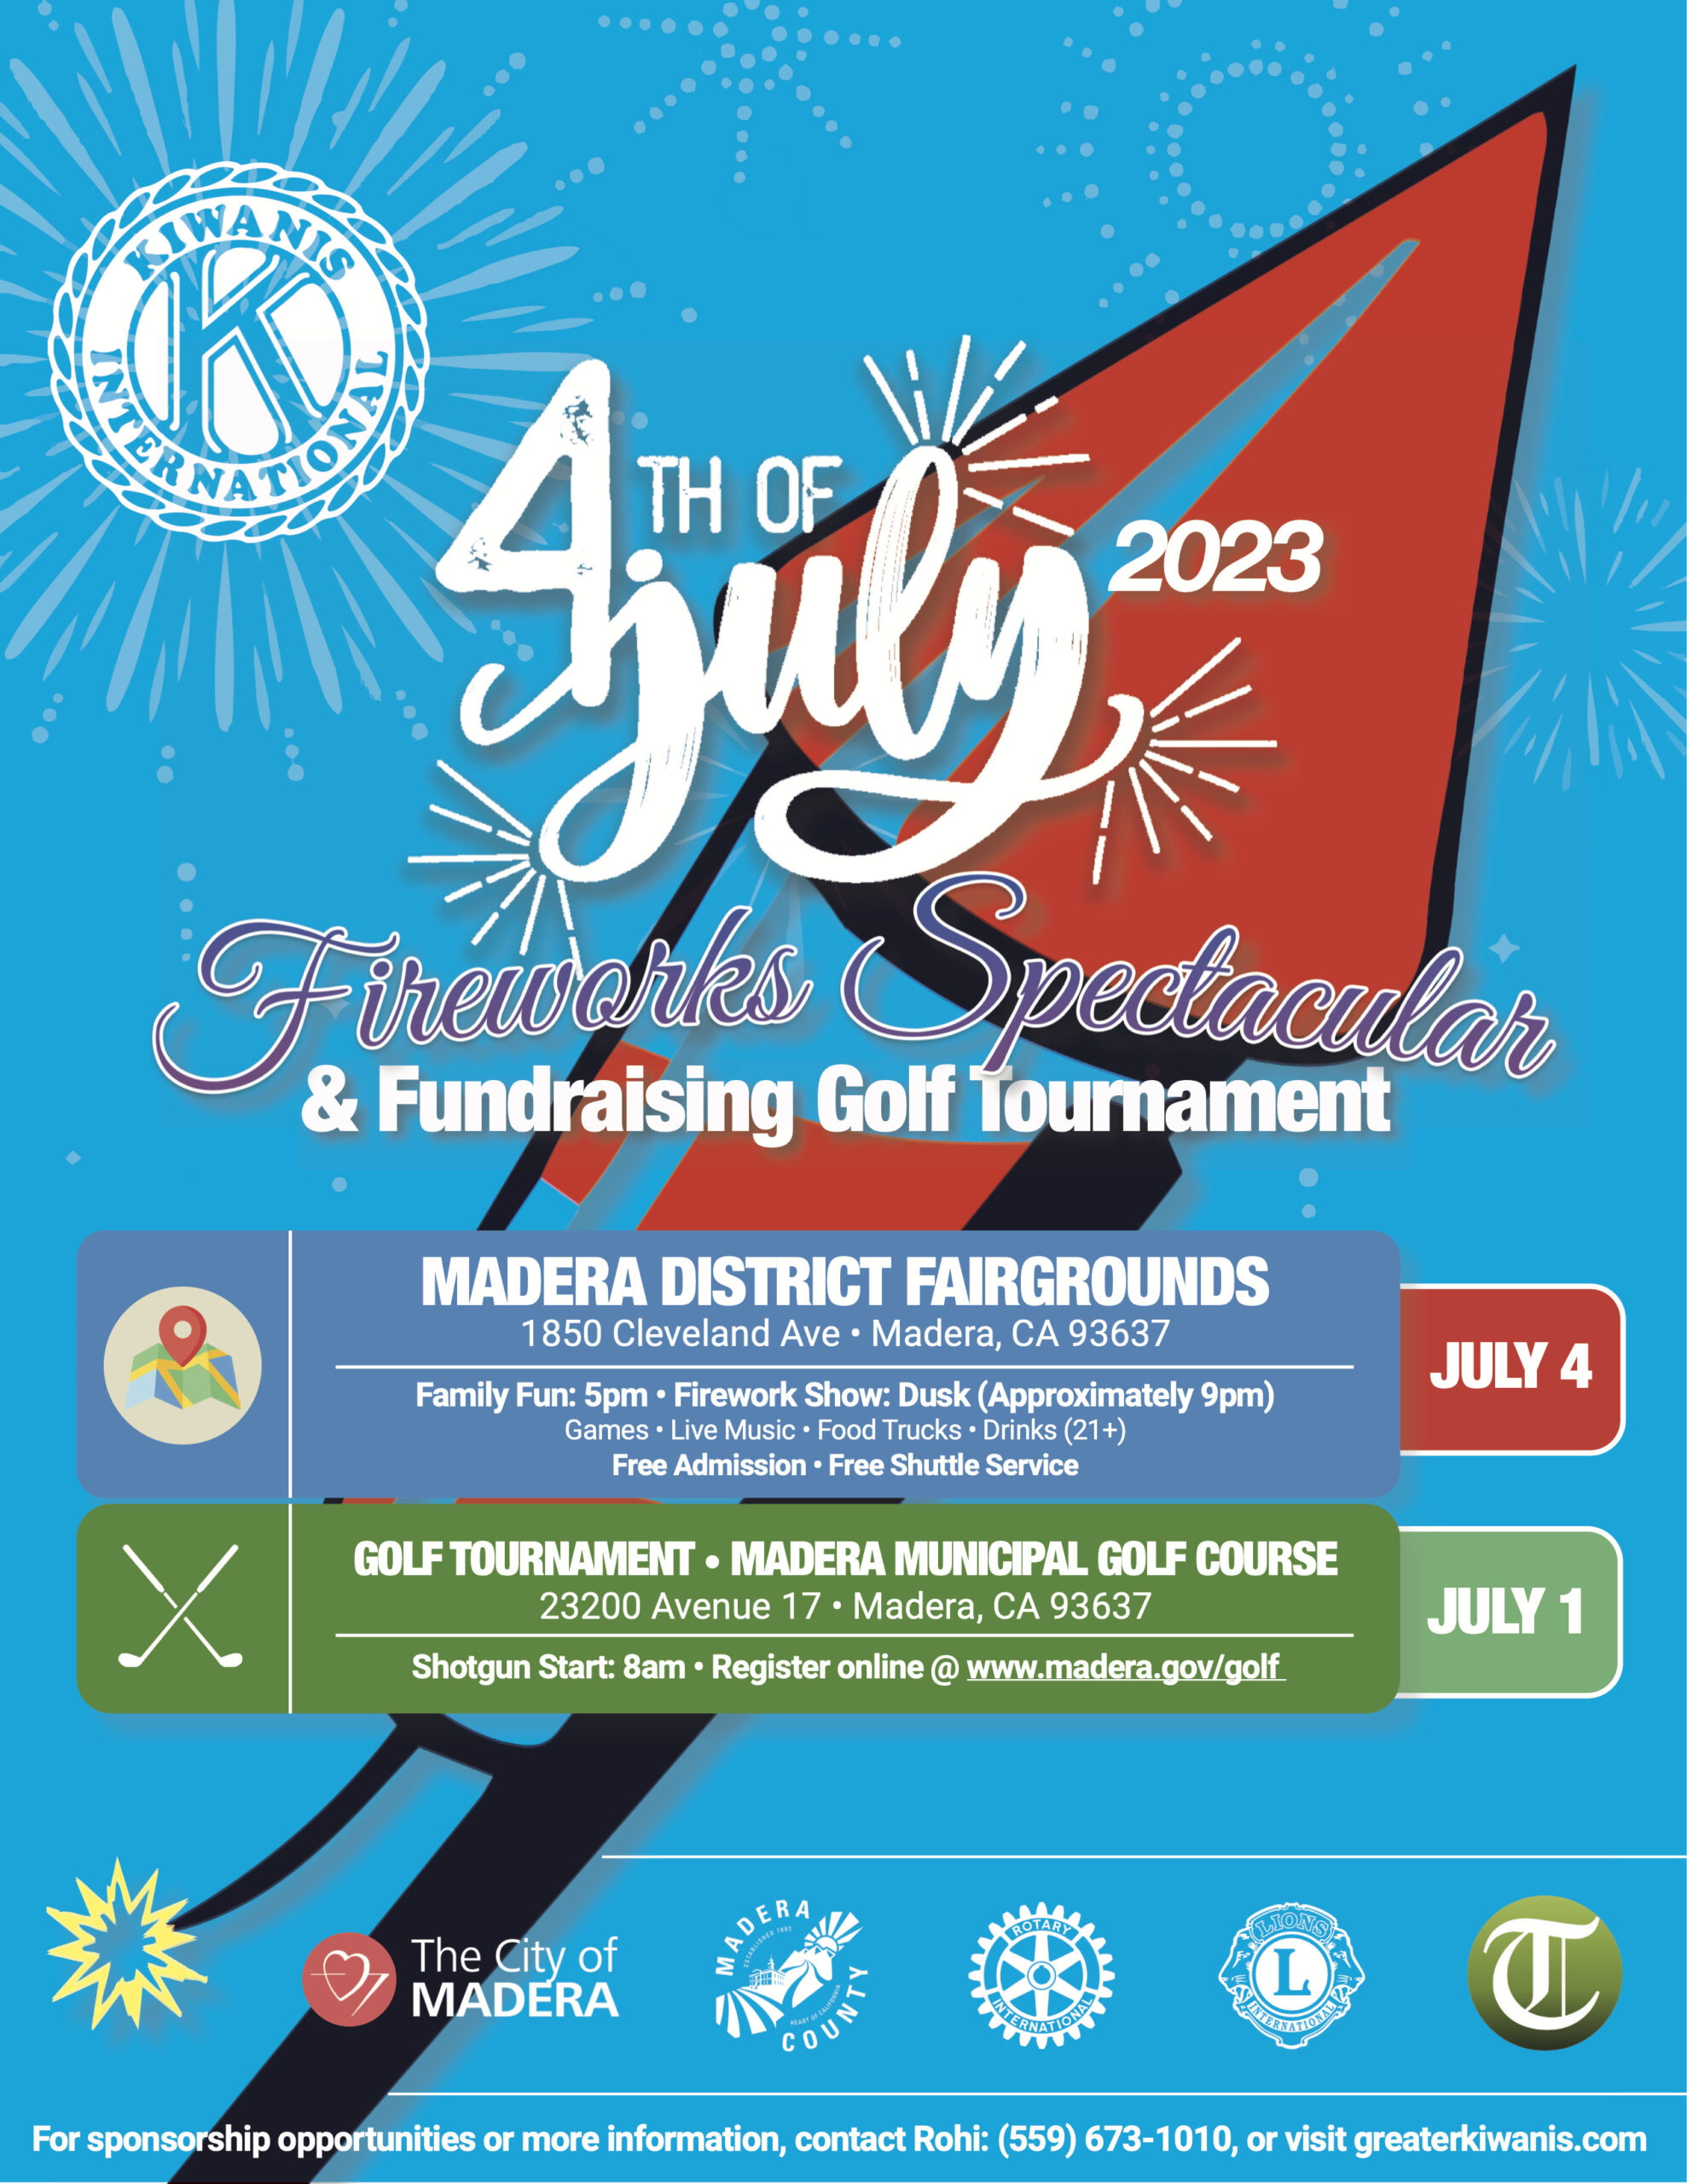 A flyer depicting a 2023 4th of July event at Madera Fairgrounds